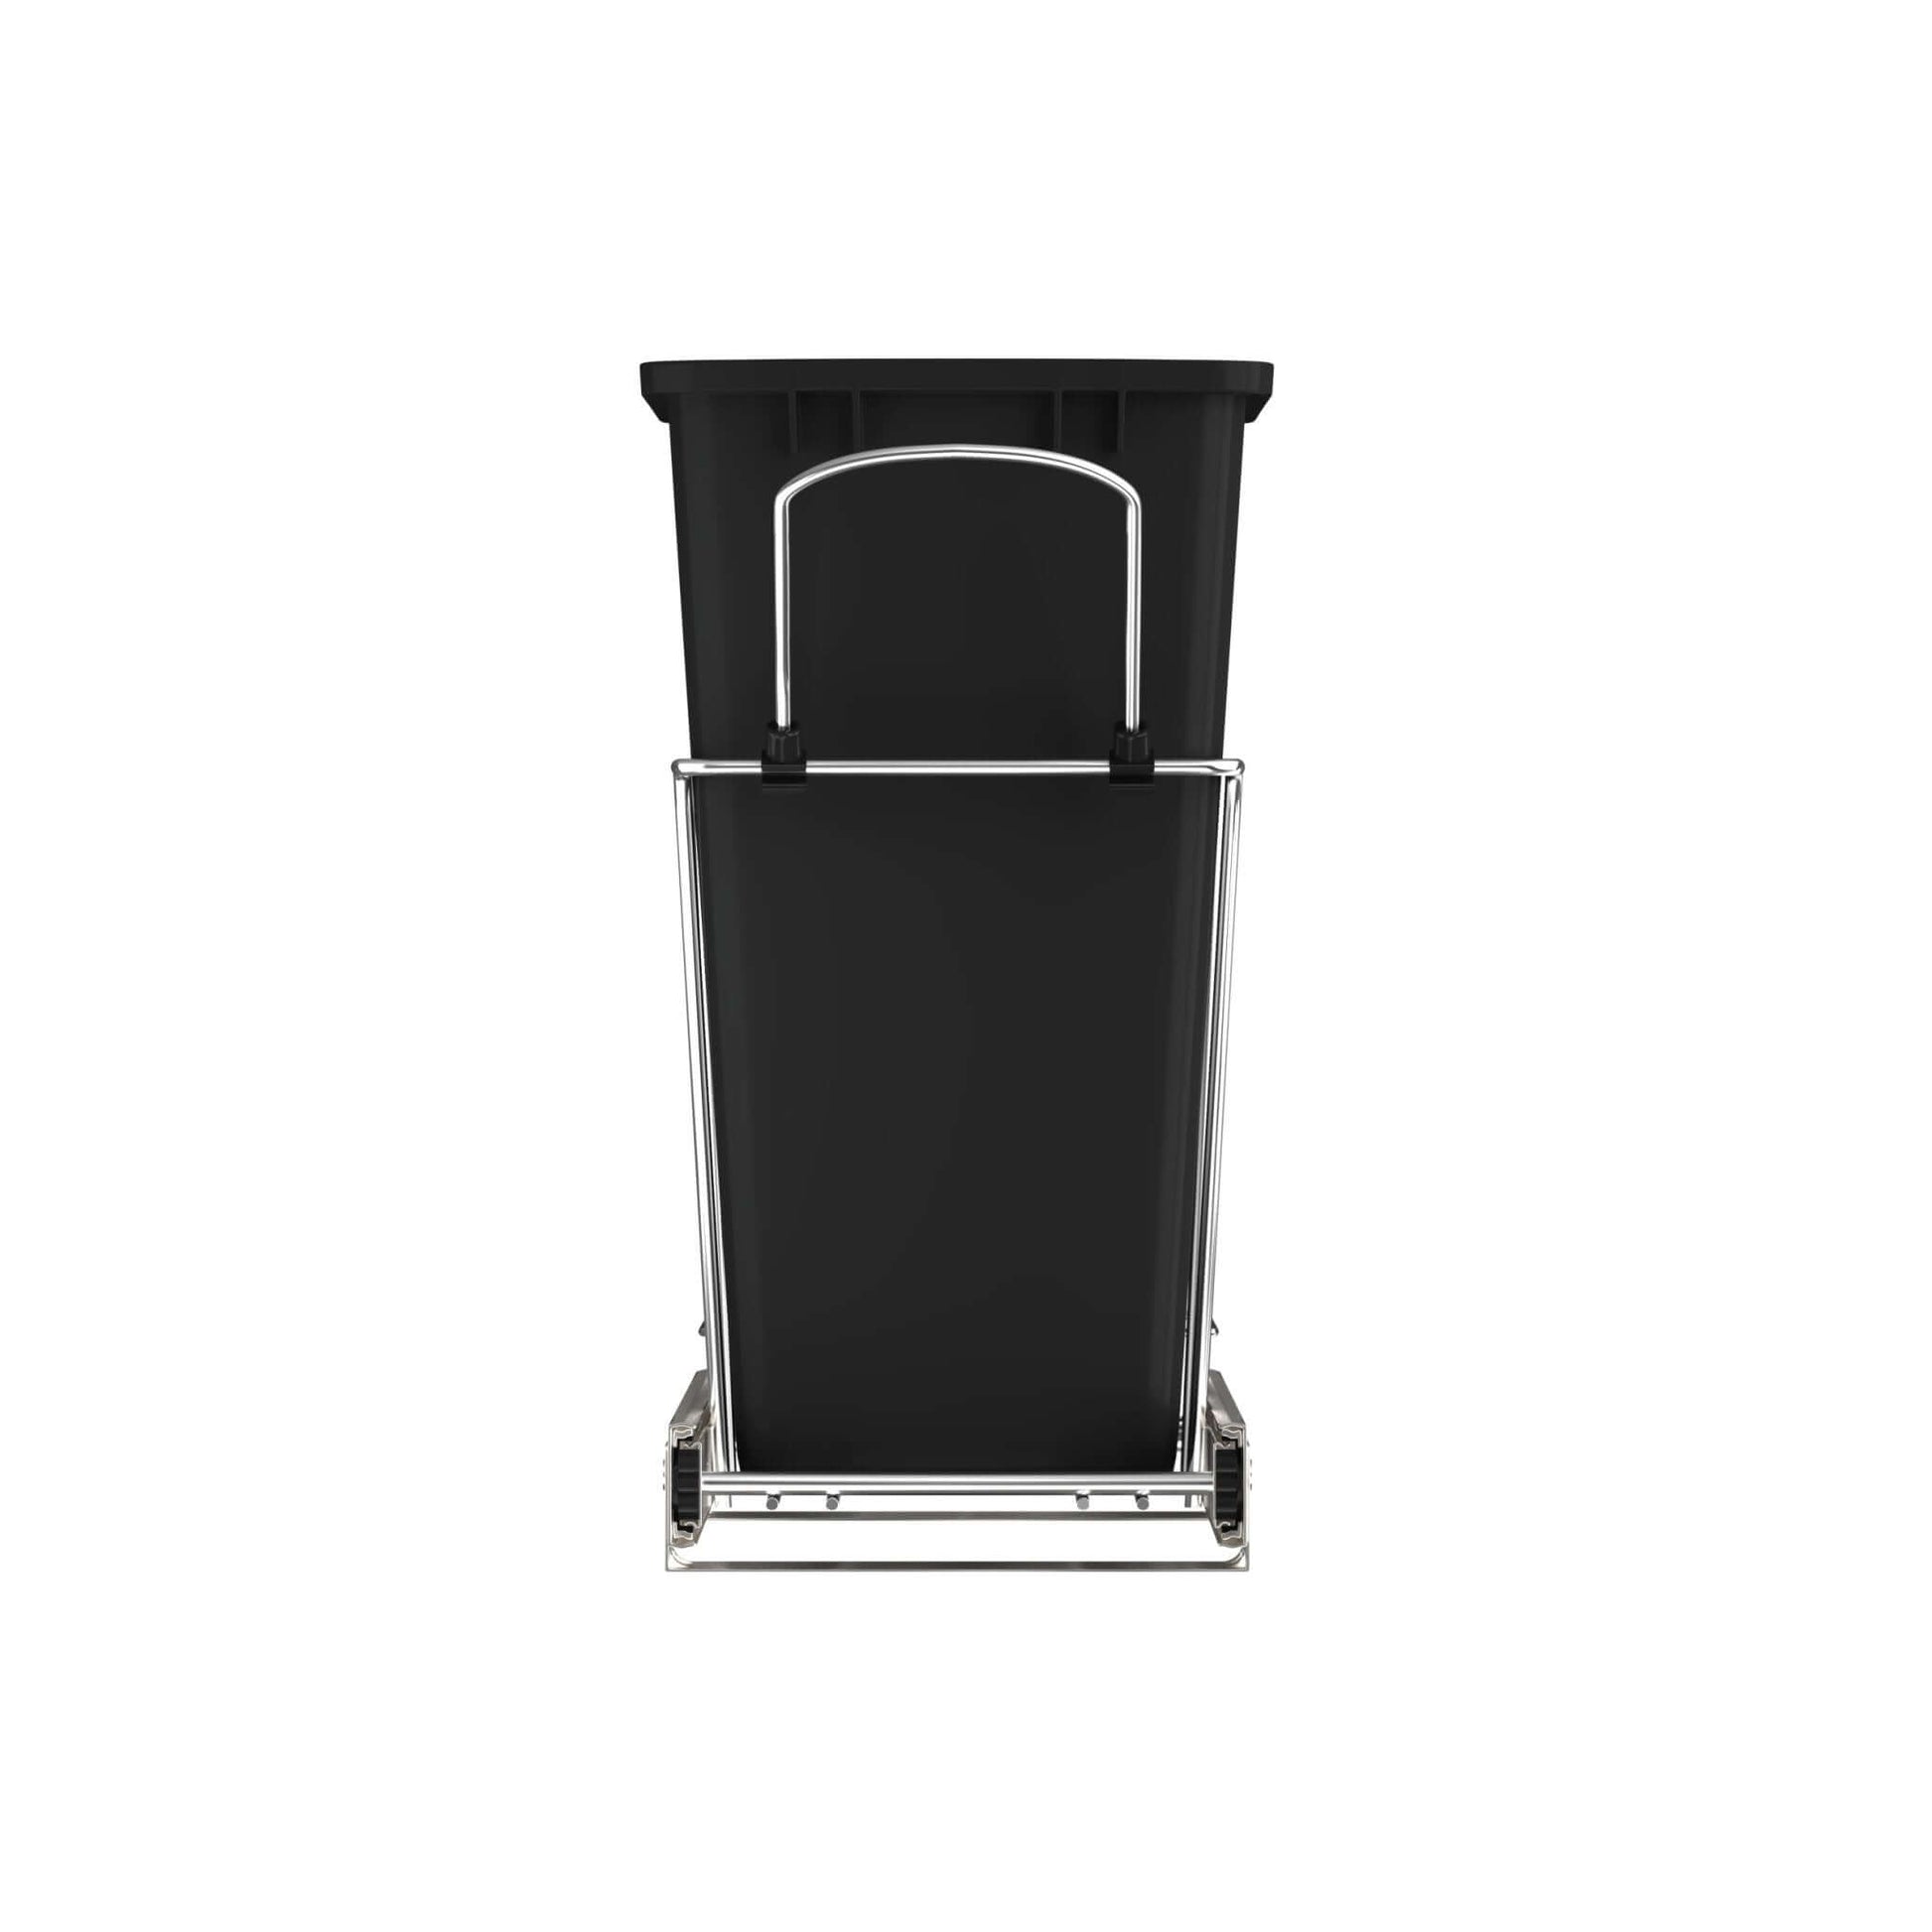 Rev-A-Shelf - Chrome Steel Pull Out Waste/Trash Container w/Rear Basket Storage - RV-12KD-18C S